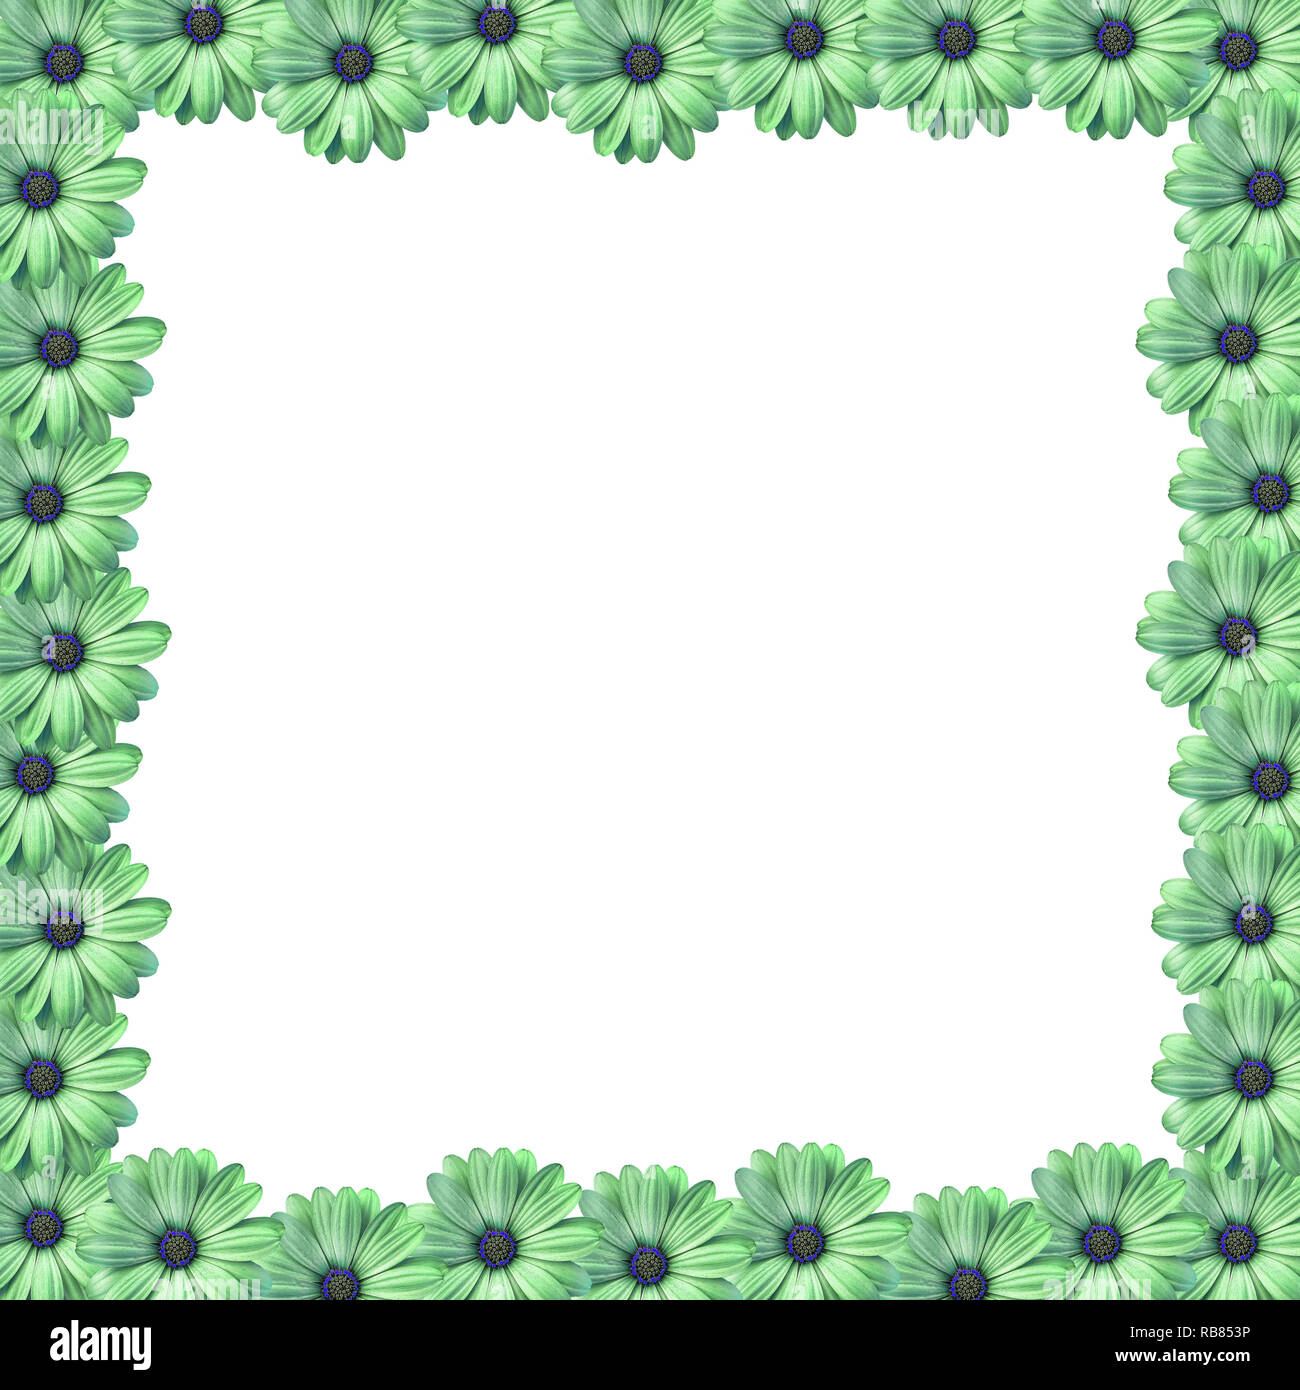 Background with green colored daisy like flower border background frame  Stock Photo - Alamy